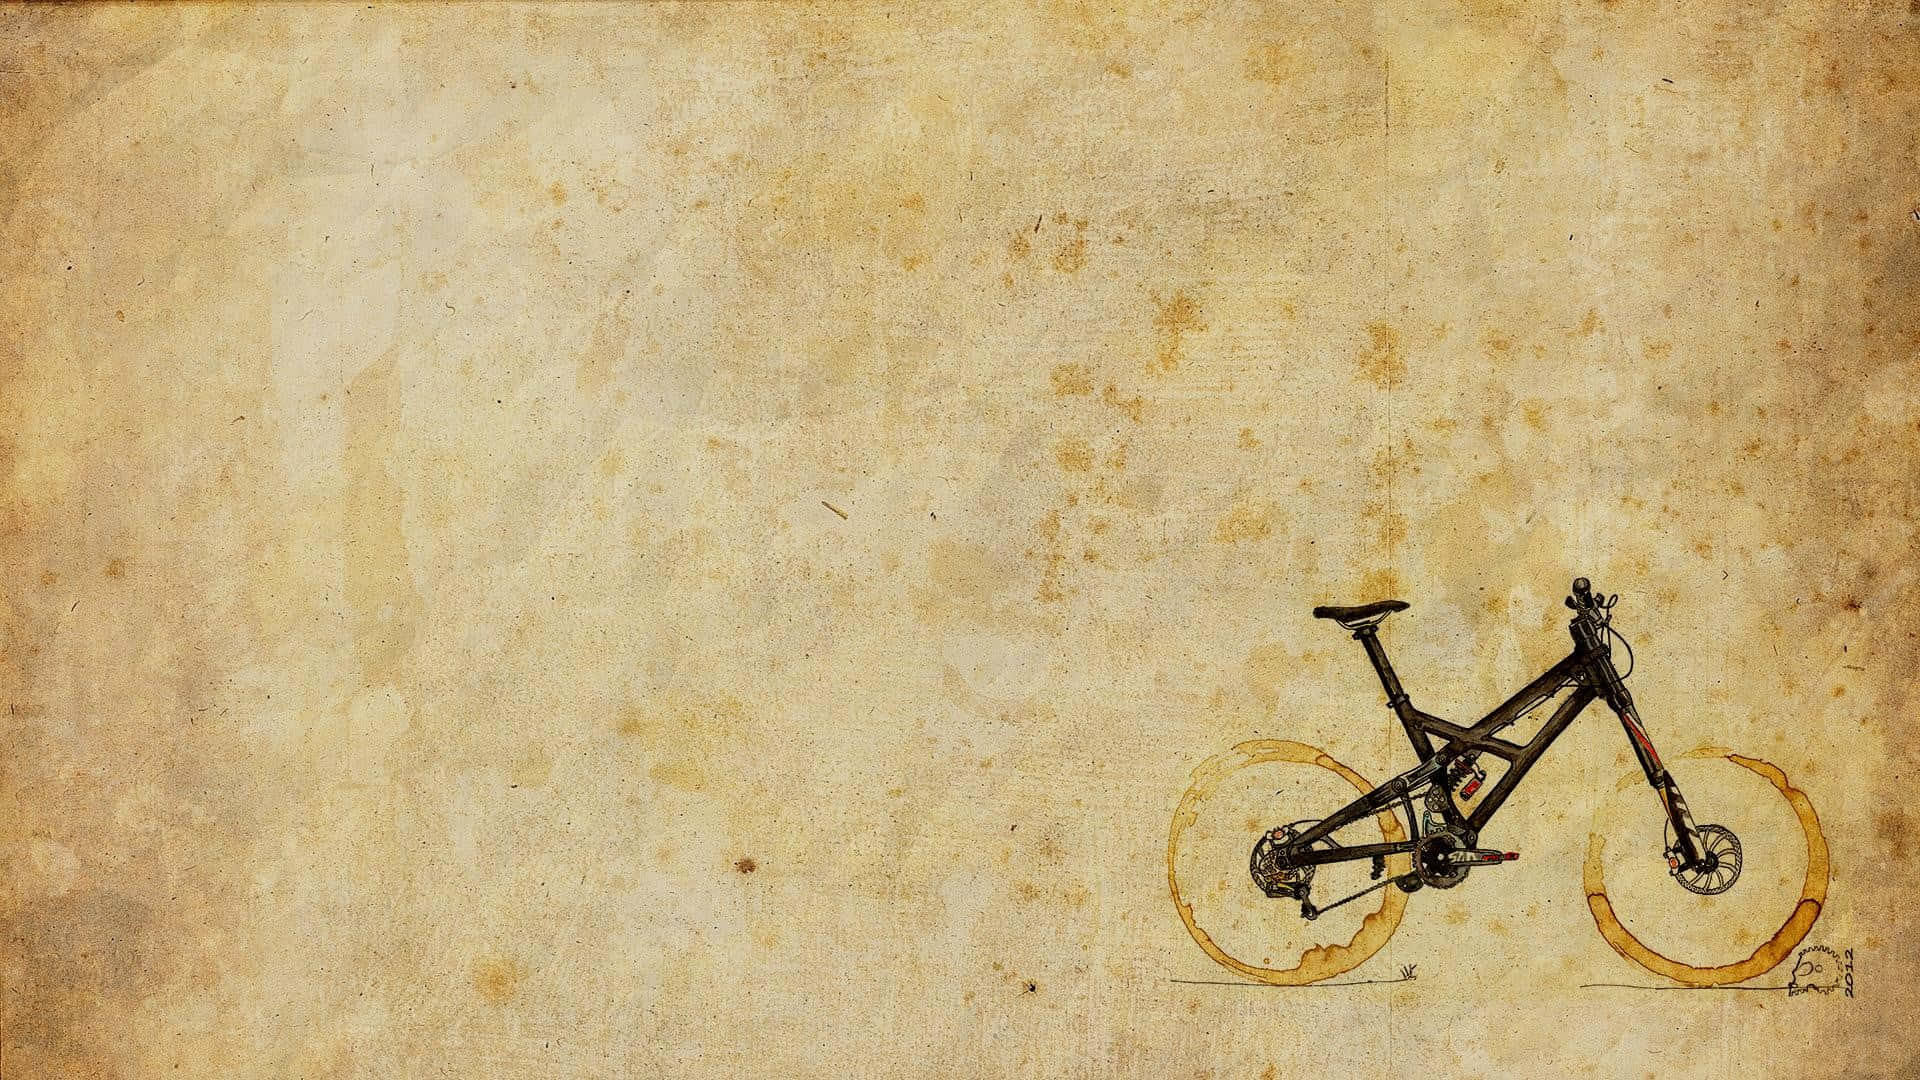 "Even when the path ahead is uncertain, the thrill of BMX remains the same." Wallpaper